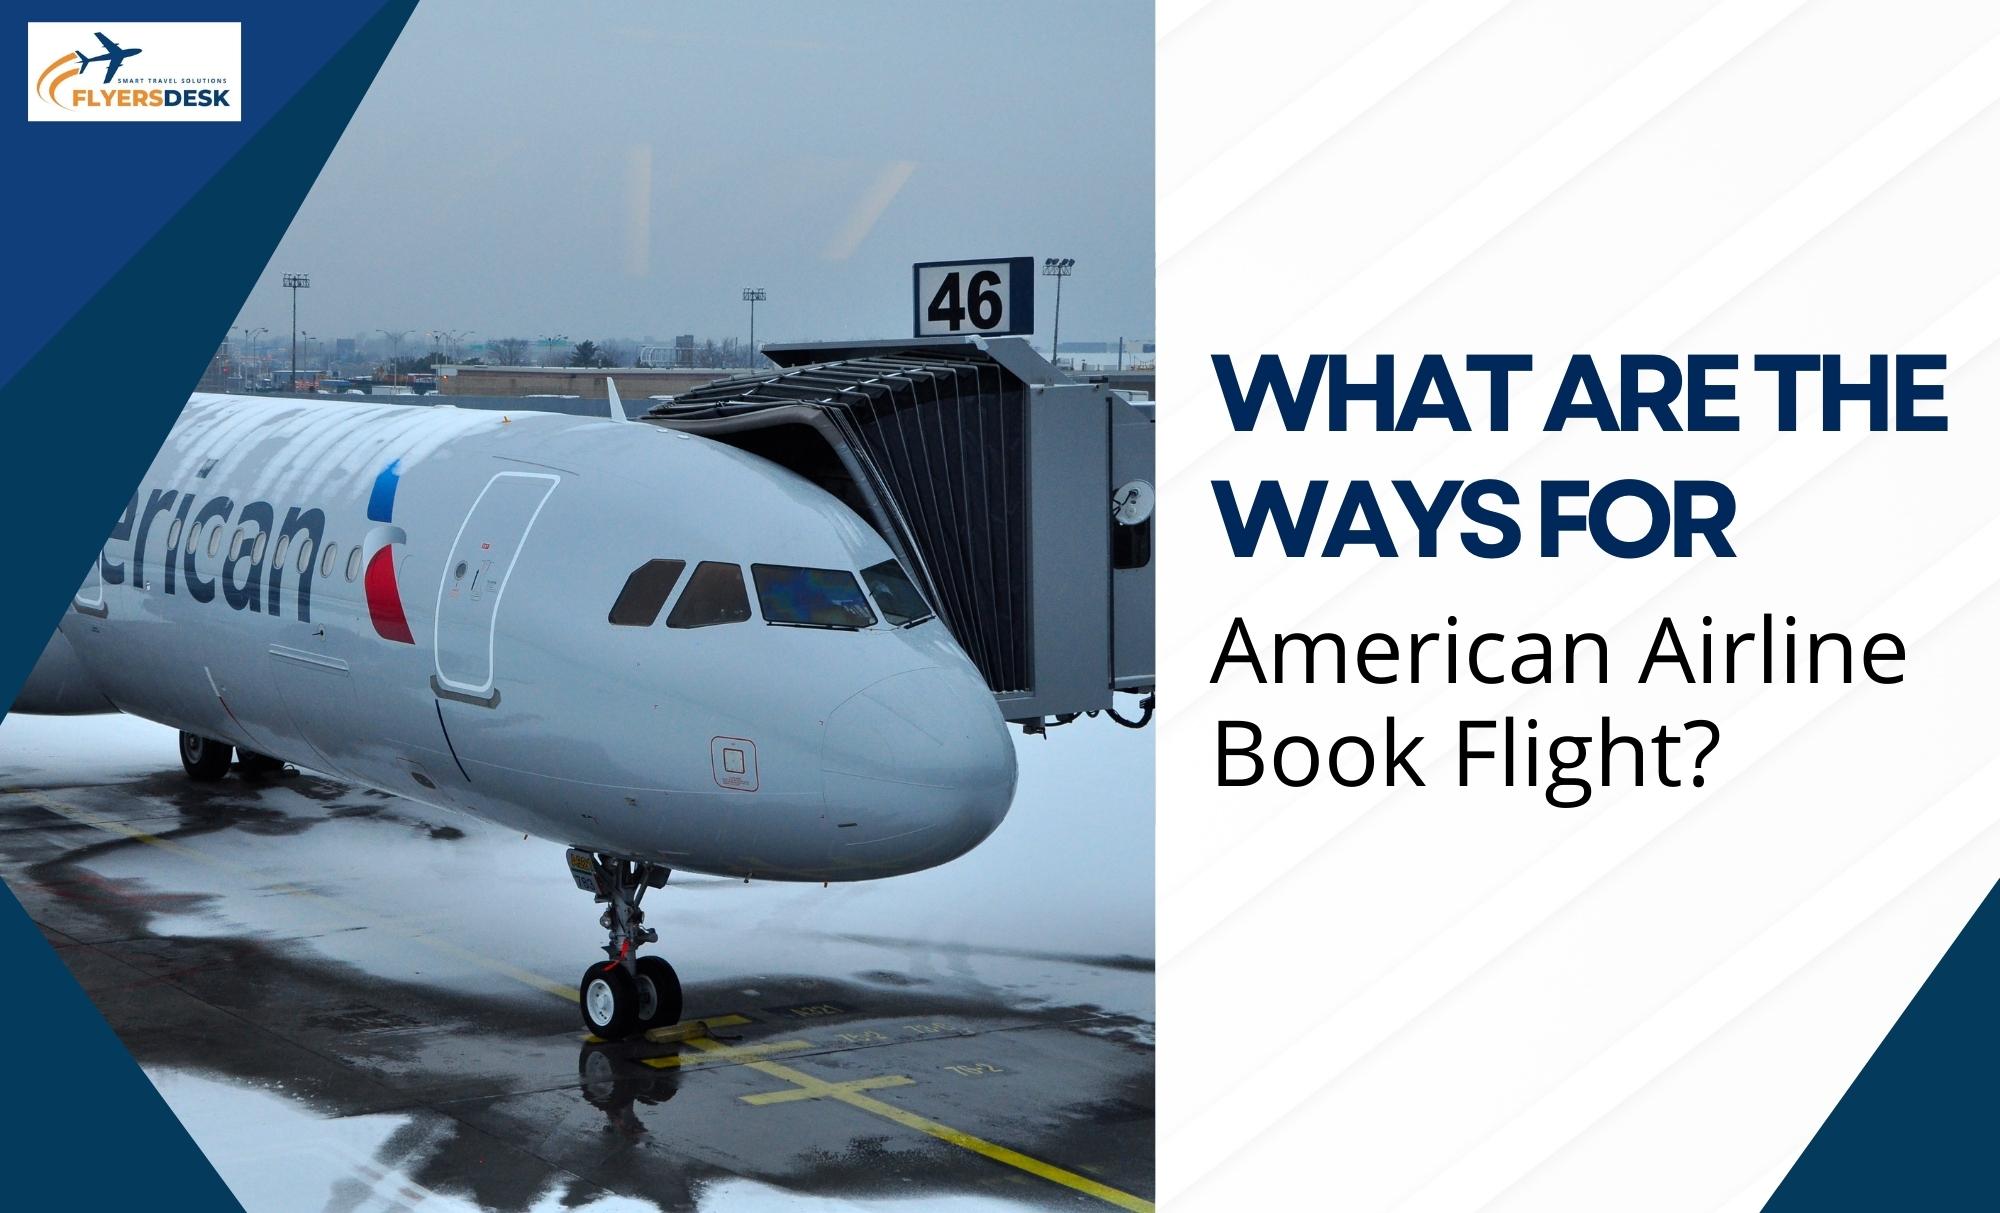 ways for american airlines book flight